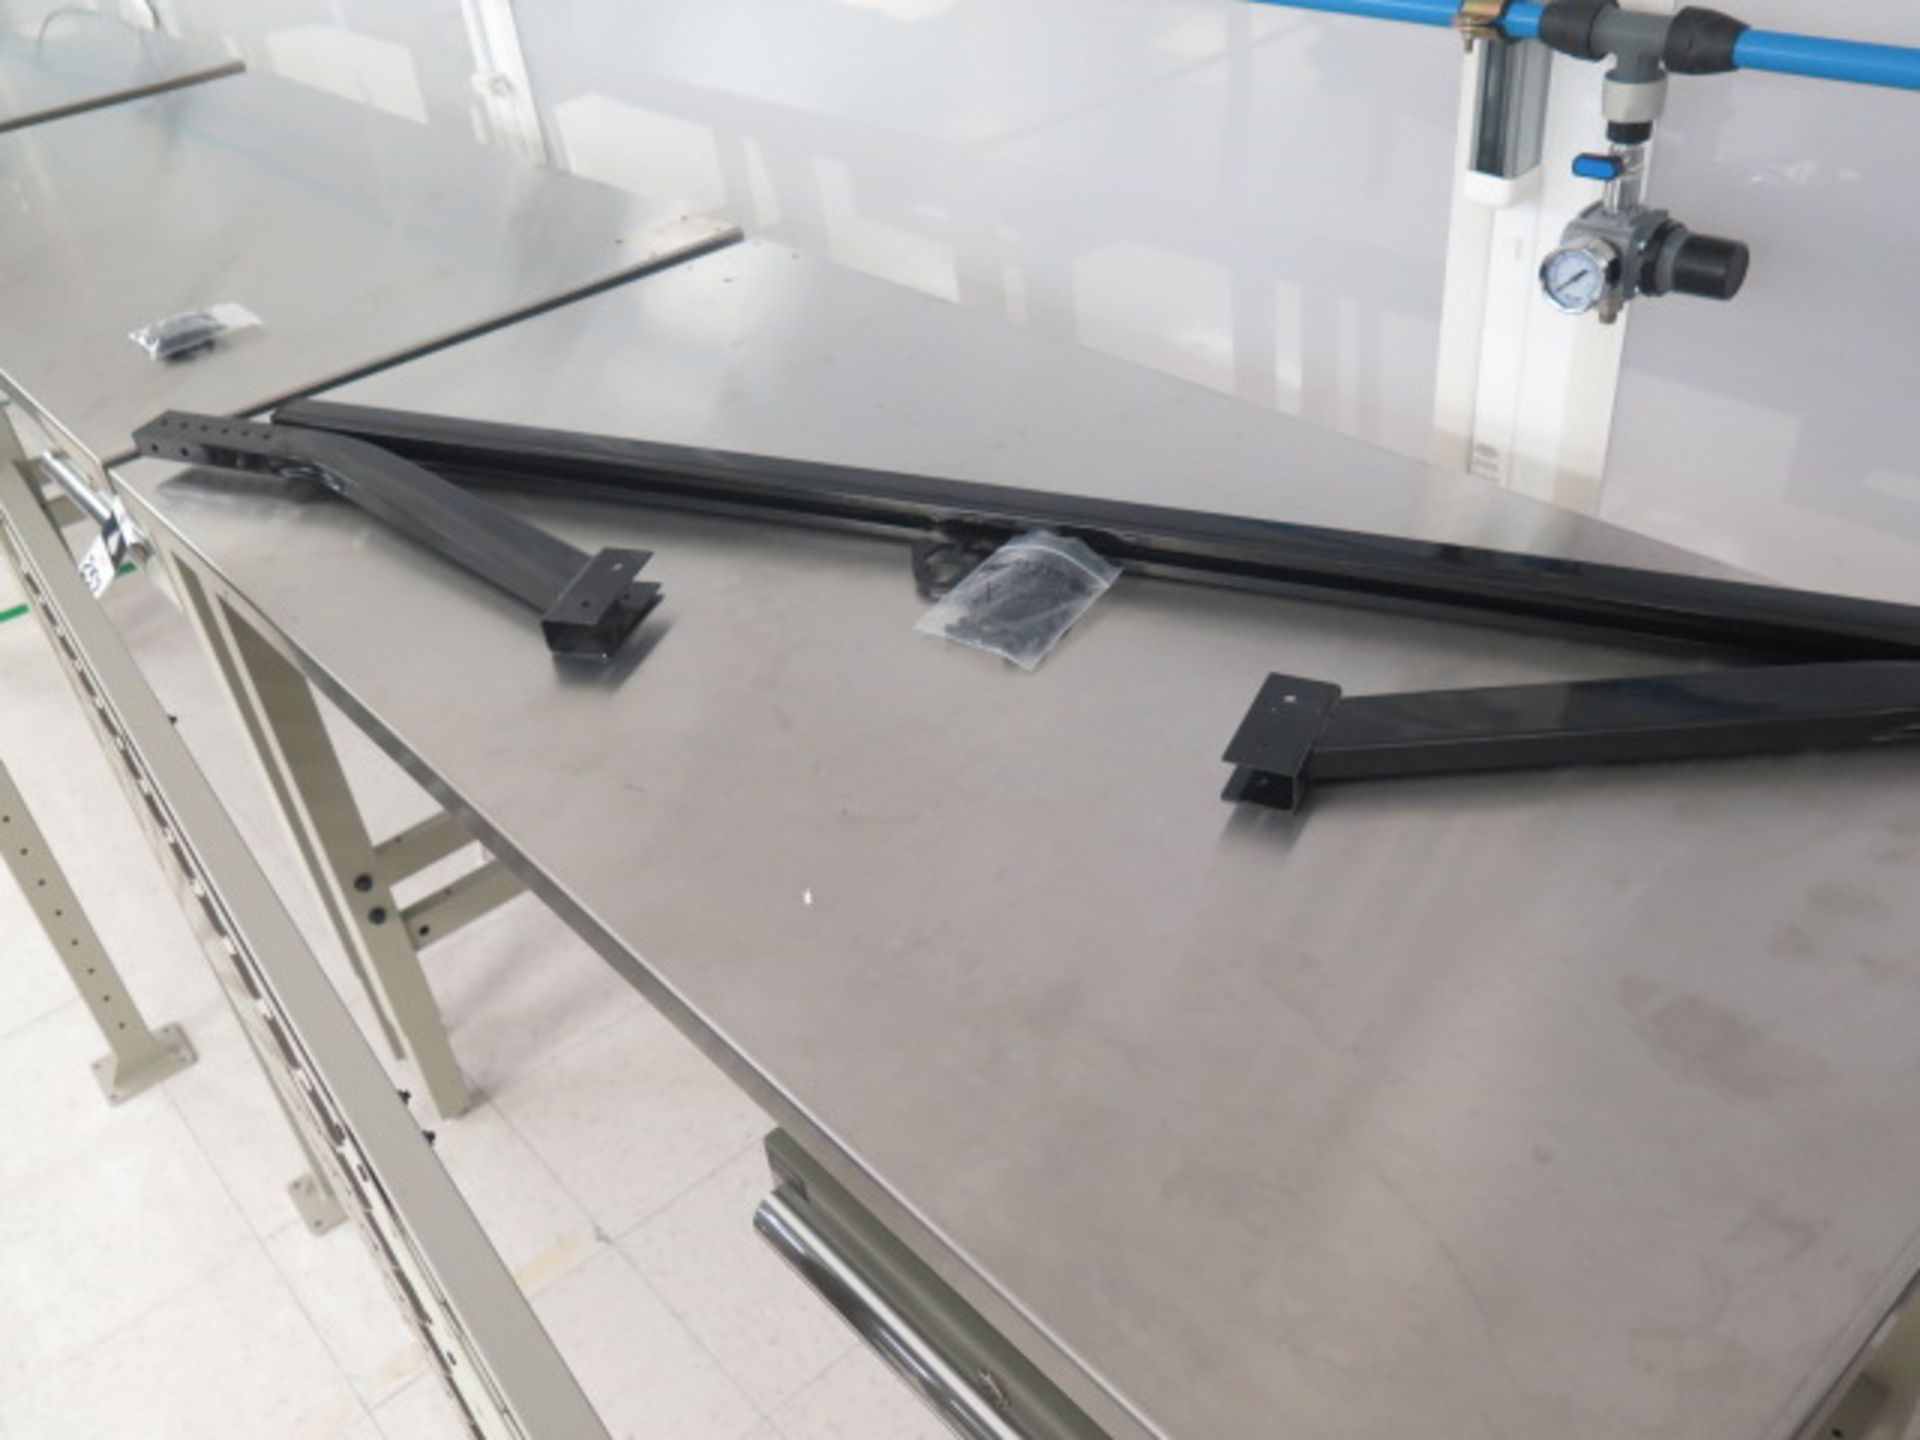 Global 30" x 60" Stainless Top Lab Benches (2) w/ Back-Boards (SOLD AS-IS - NO WARRANTY) - Image 4 of 6